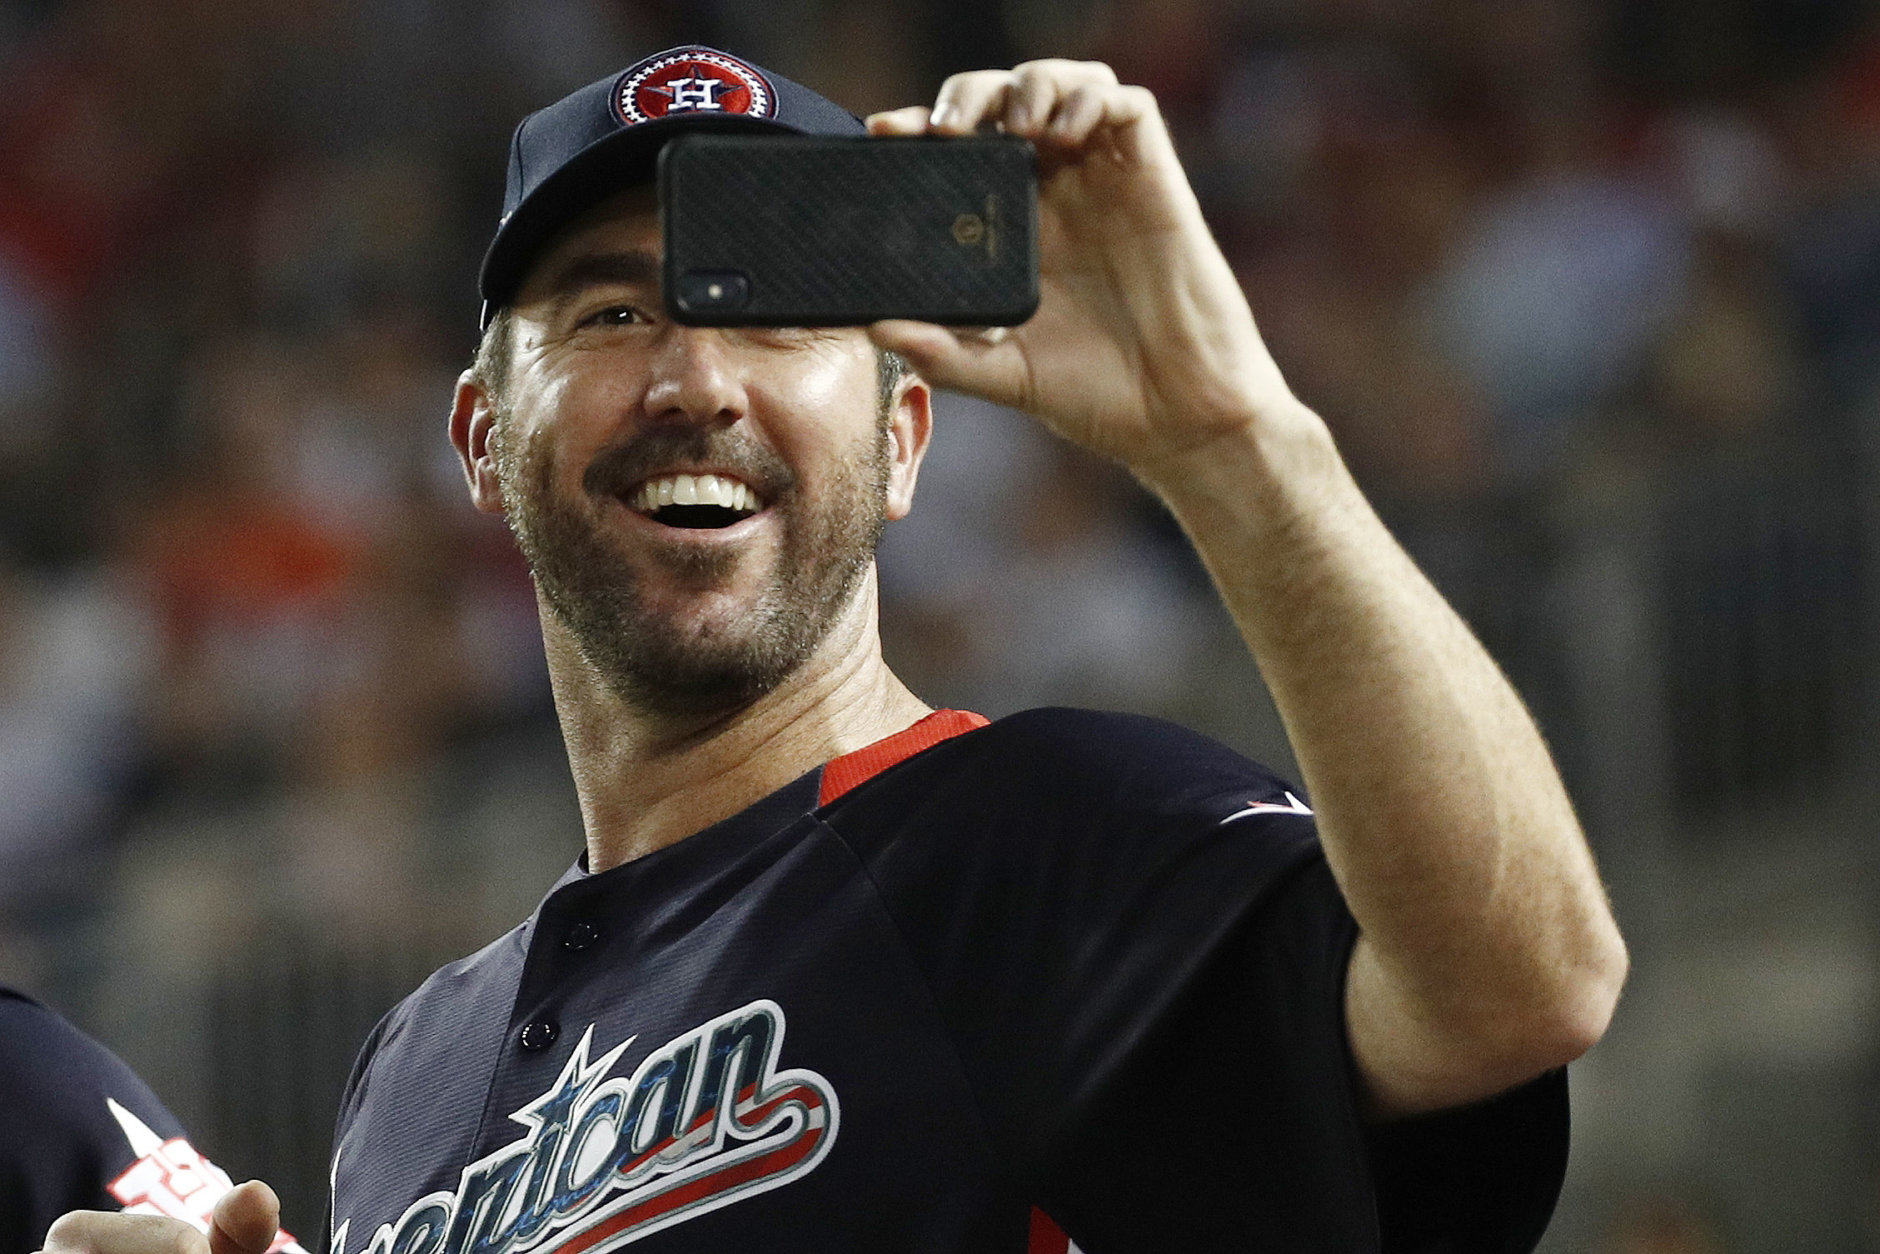 American League, Boston Red Sox pitcher Justin Verlander (35) shoots pictures during the MLB Home Run Derby, at Nationals Park, Monday, July 16, 2018 in Washington. The 89th MLB baseball All-Star Game will be played Tuesday. (AP Photo/Patrick Semansky)